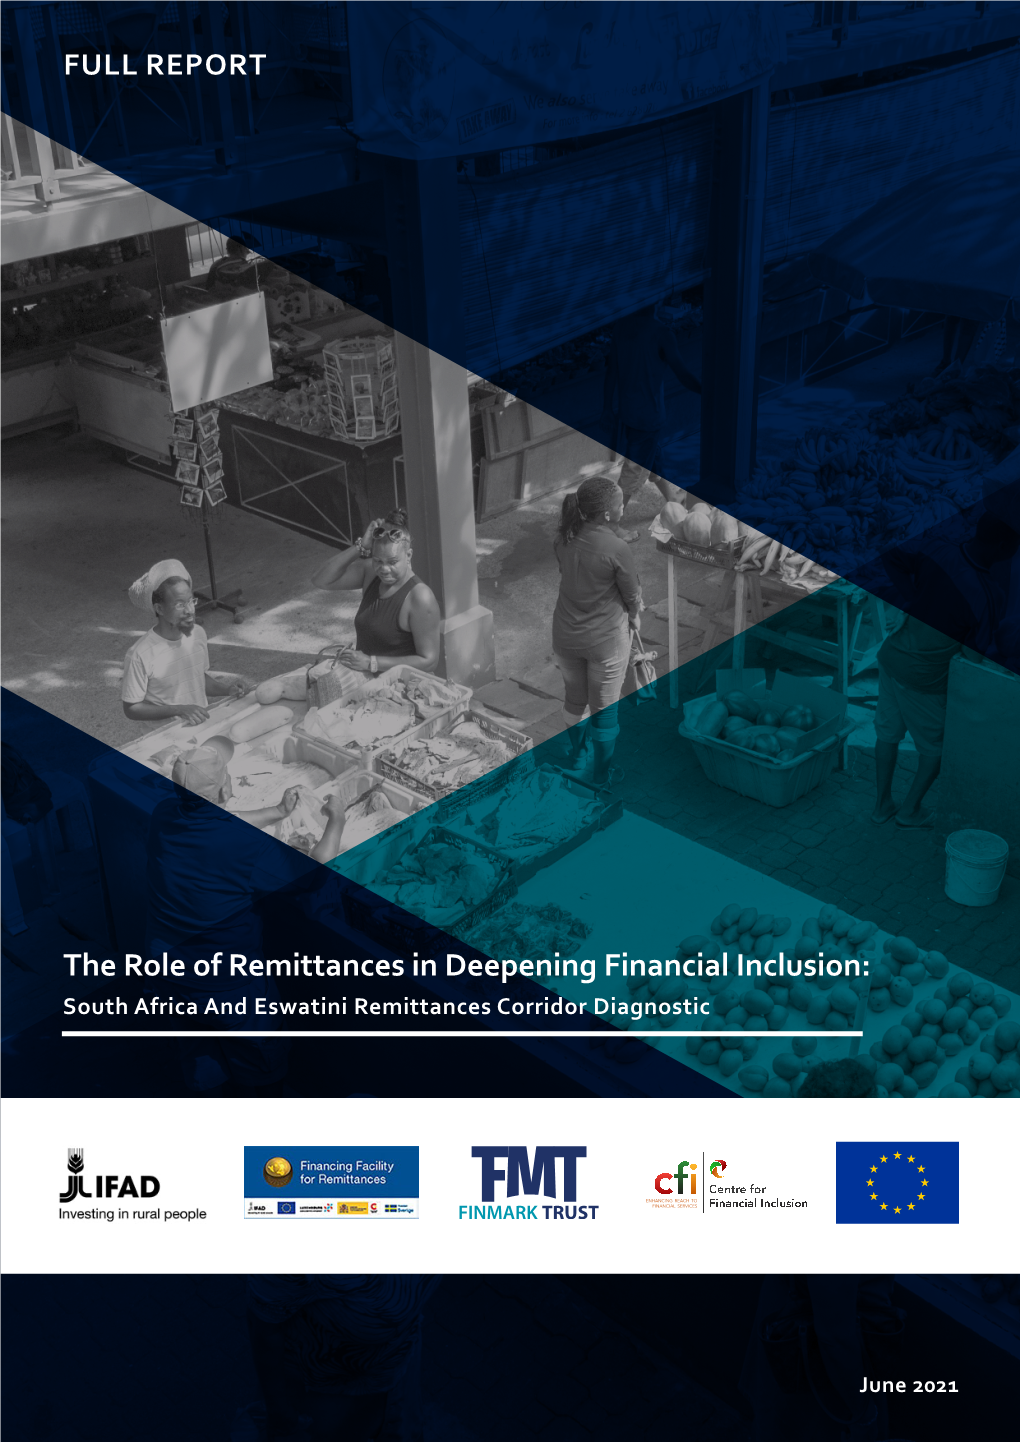 The Role of Remittances in Deepening Financial Inclusion: South Africa and Eswatini Remittances Corridor Diagnostic